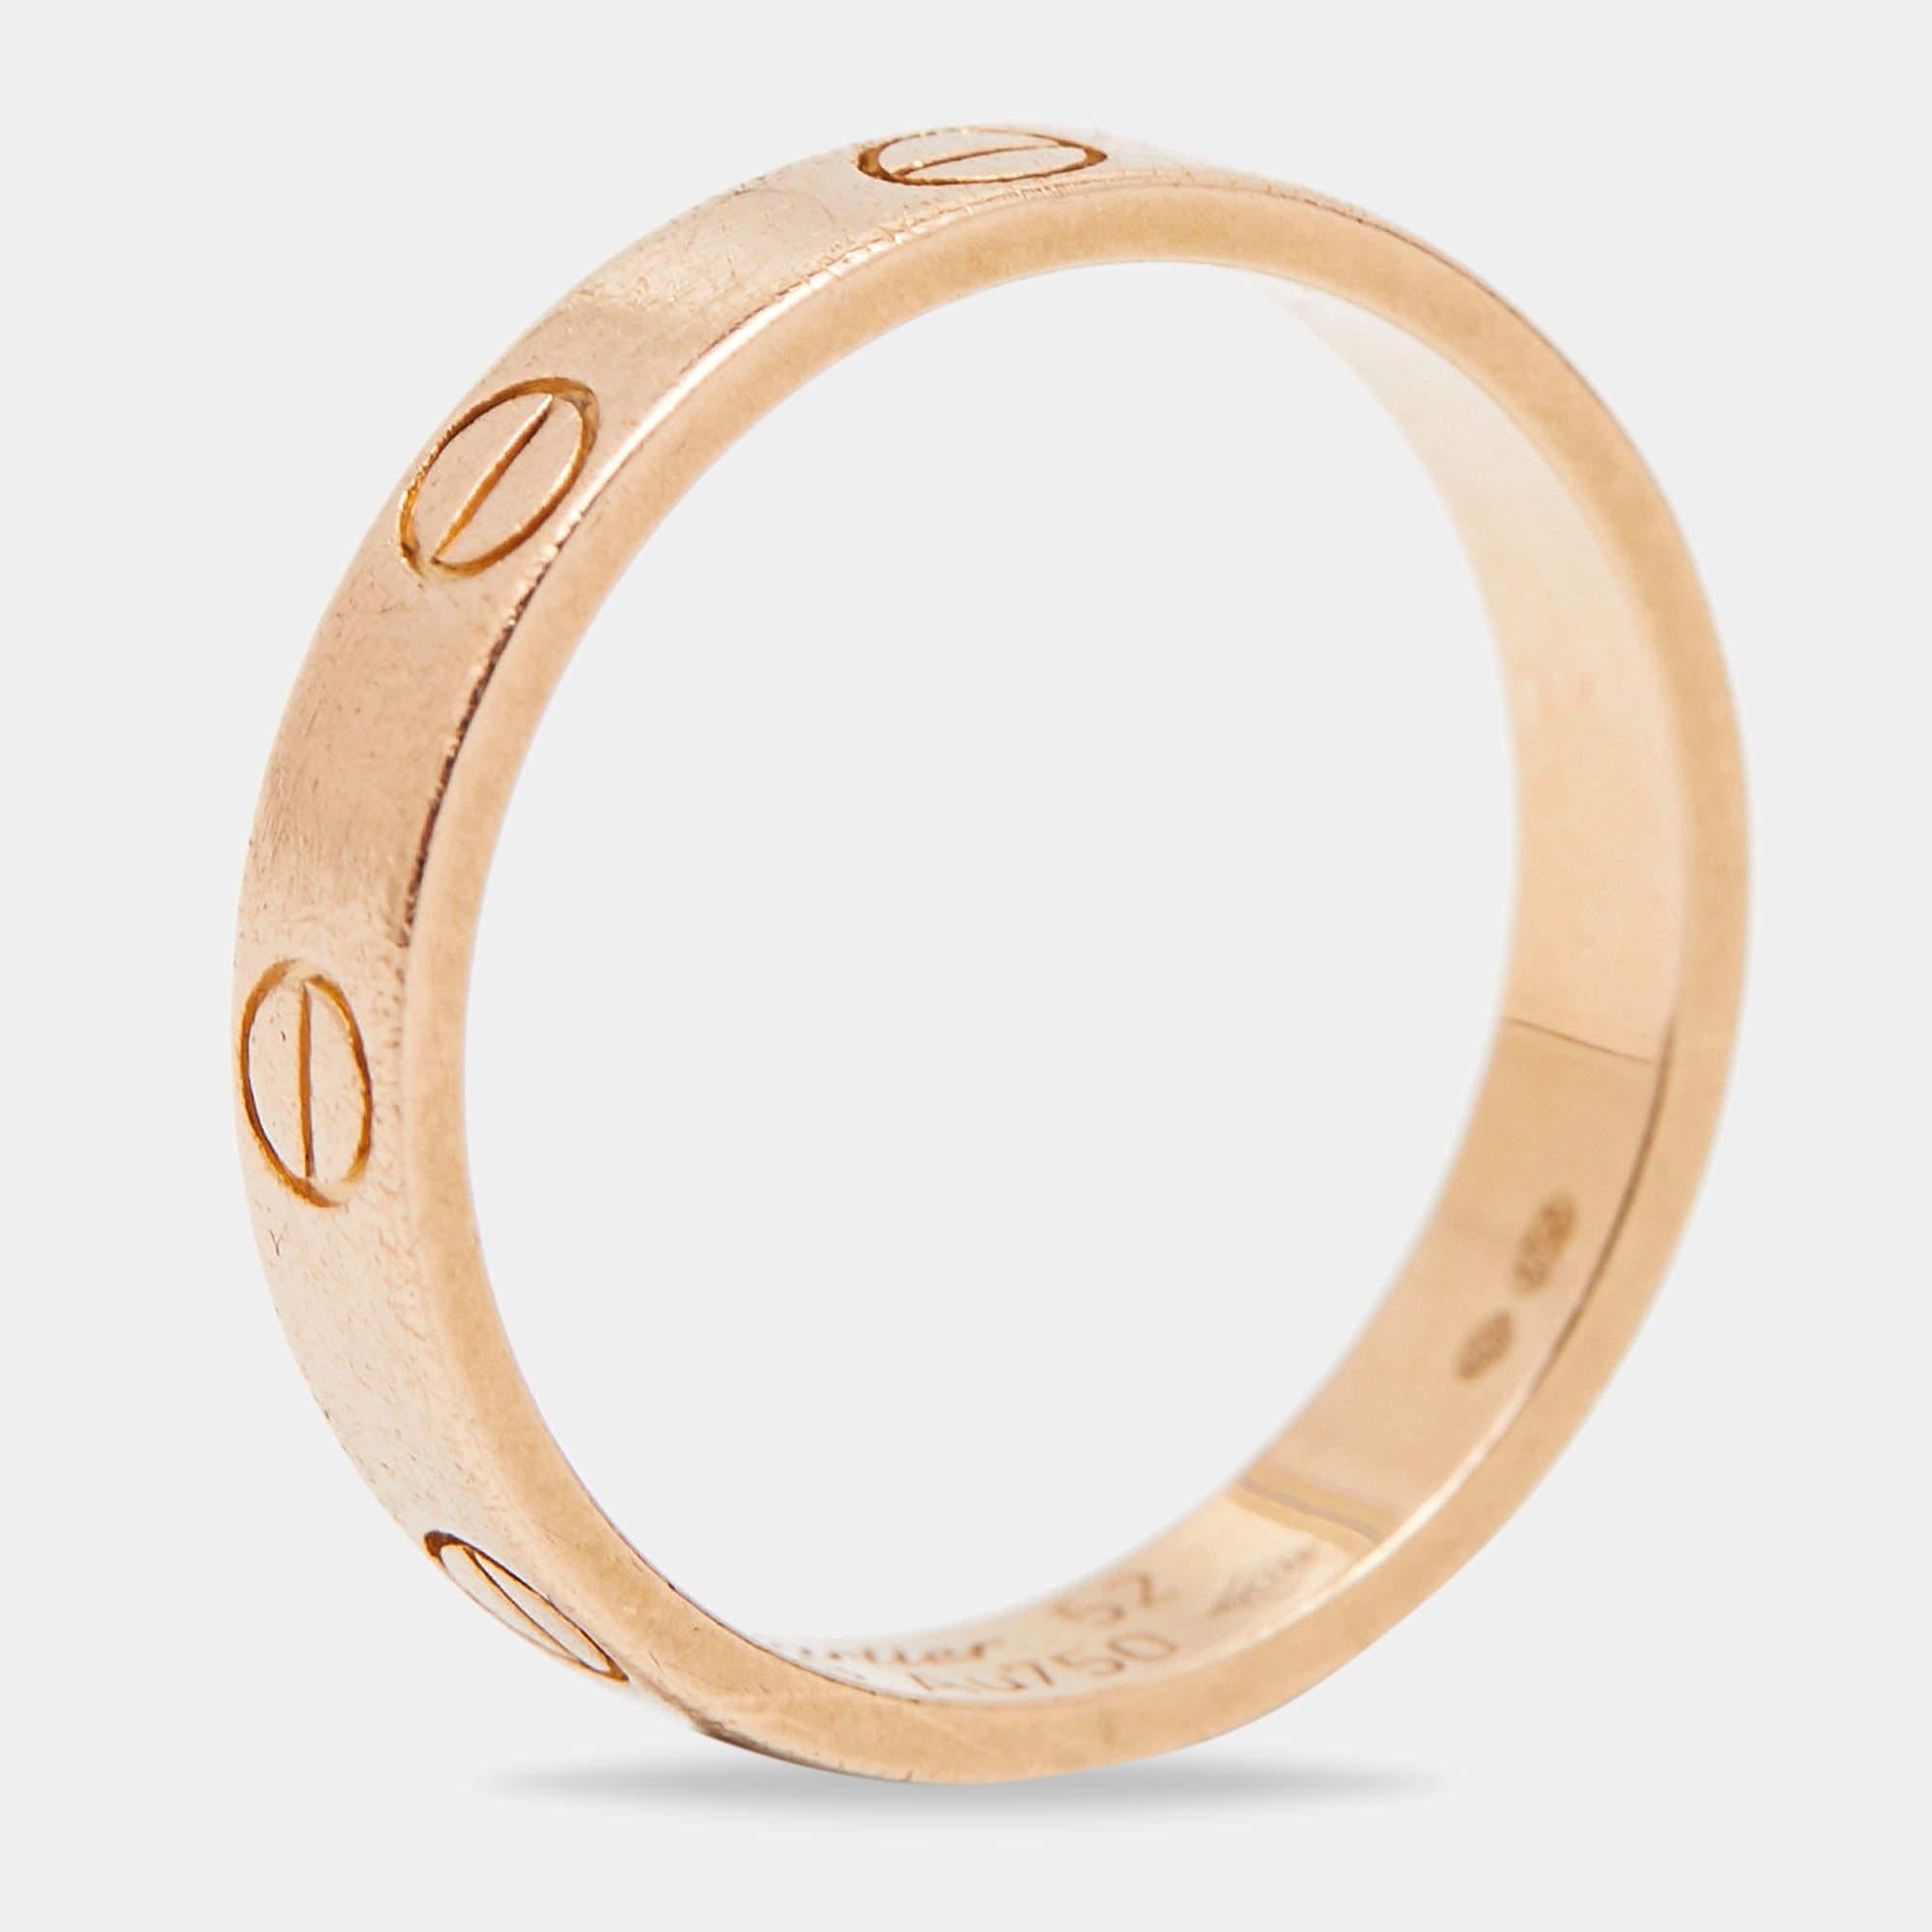 Cartier's Love band continues to be a favored choice when it comes to choosing a wedding or engagement ring and even as a special addition to one's collection. A ring version of the Love bracelet from the 1970s, this creation heralds the idea of